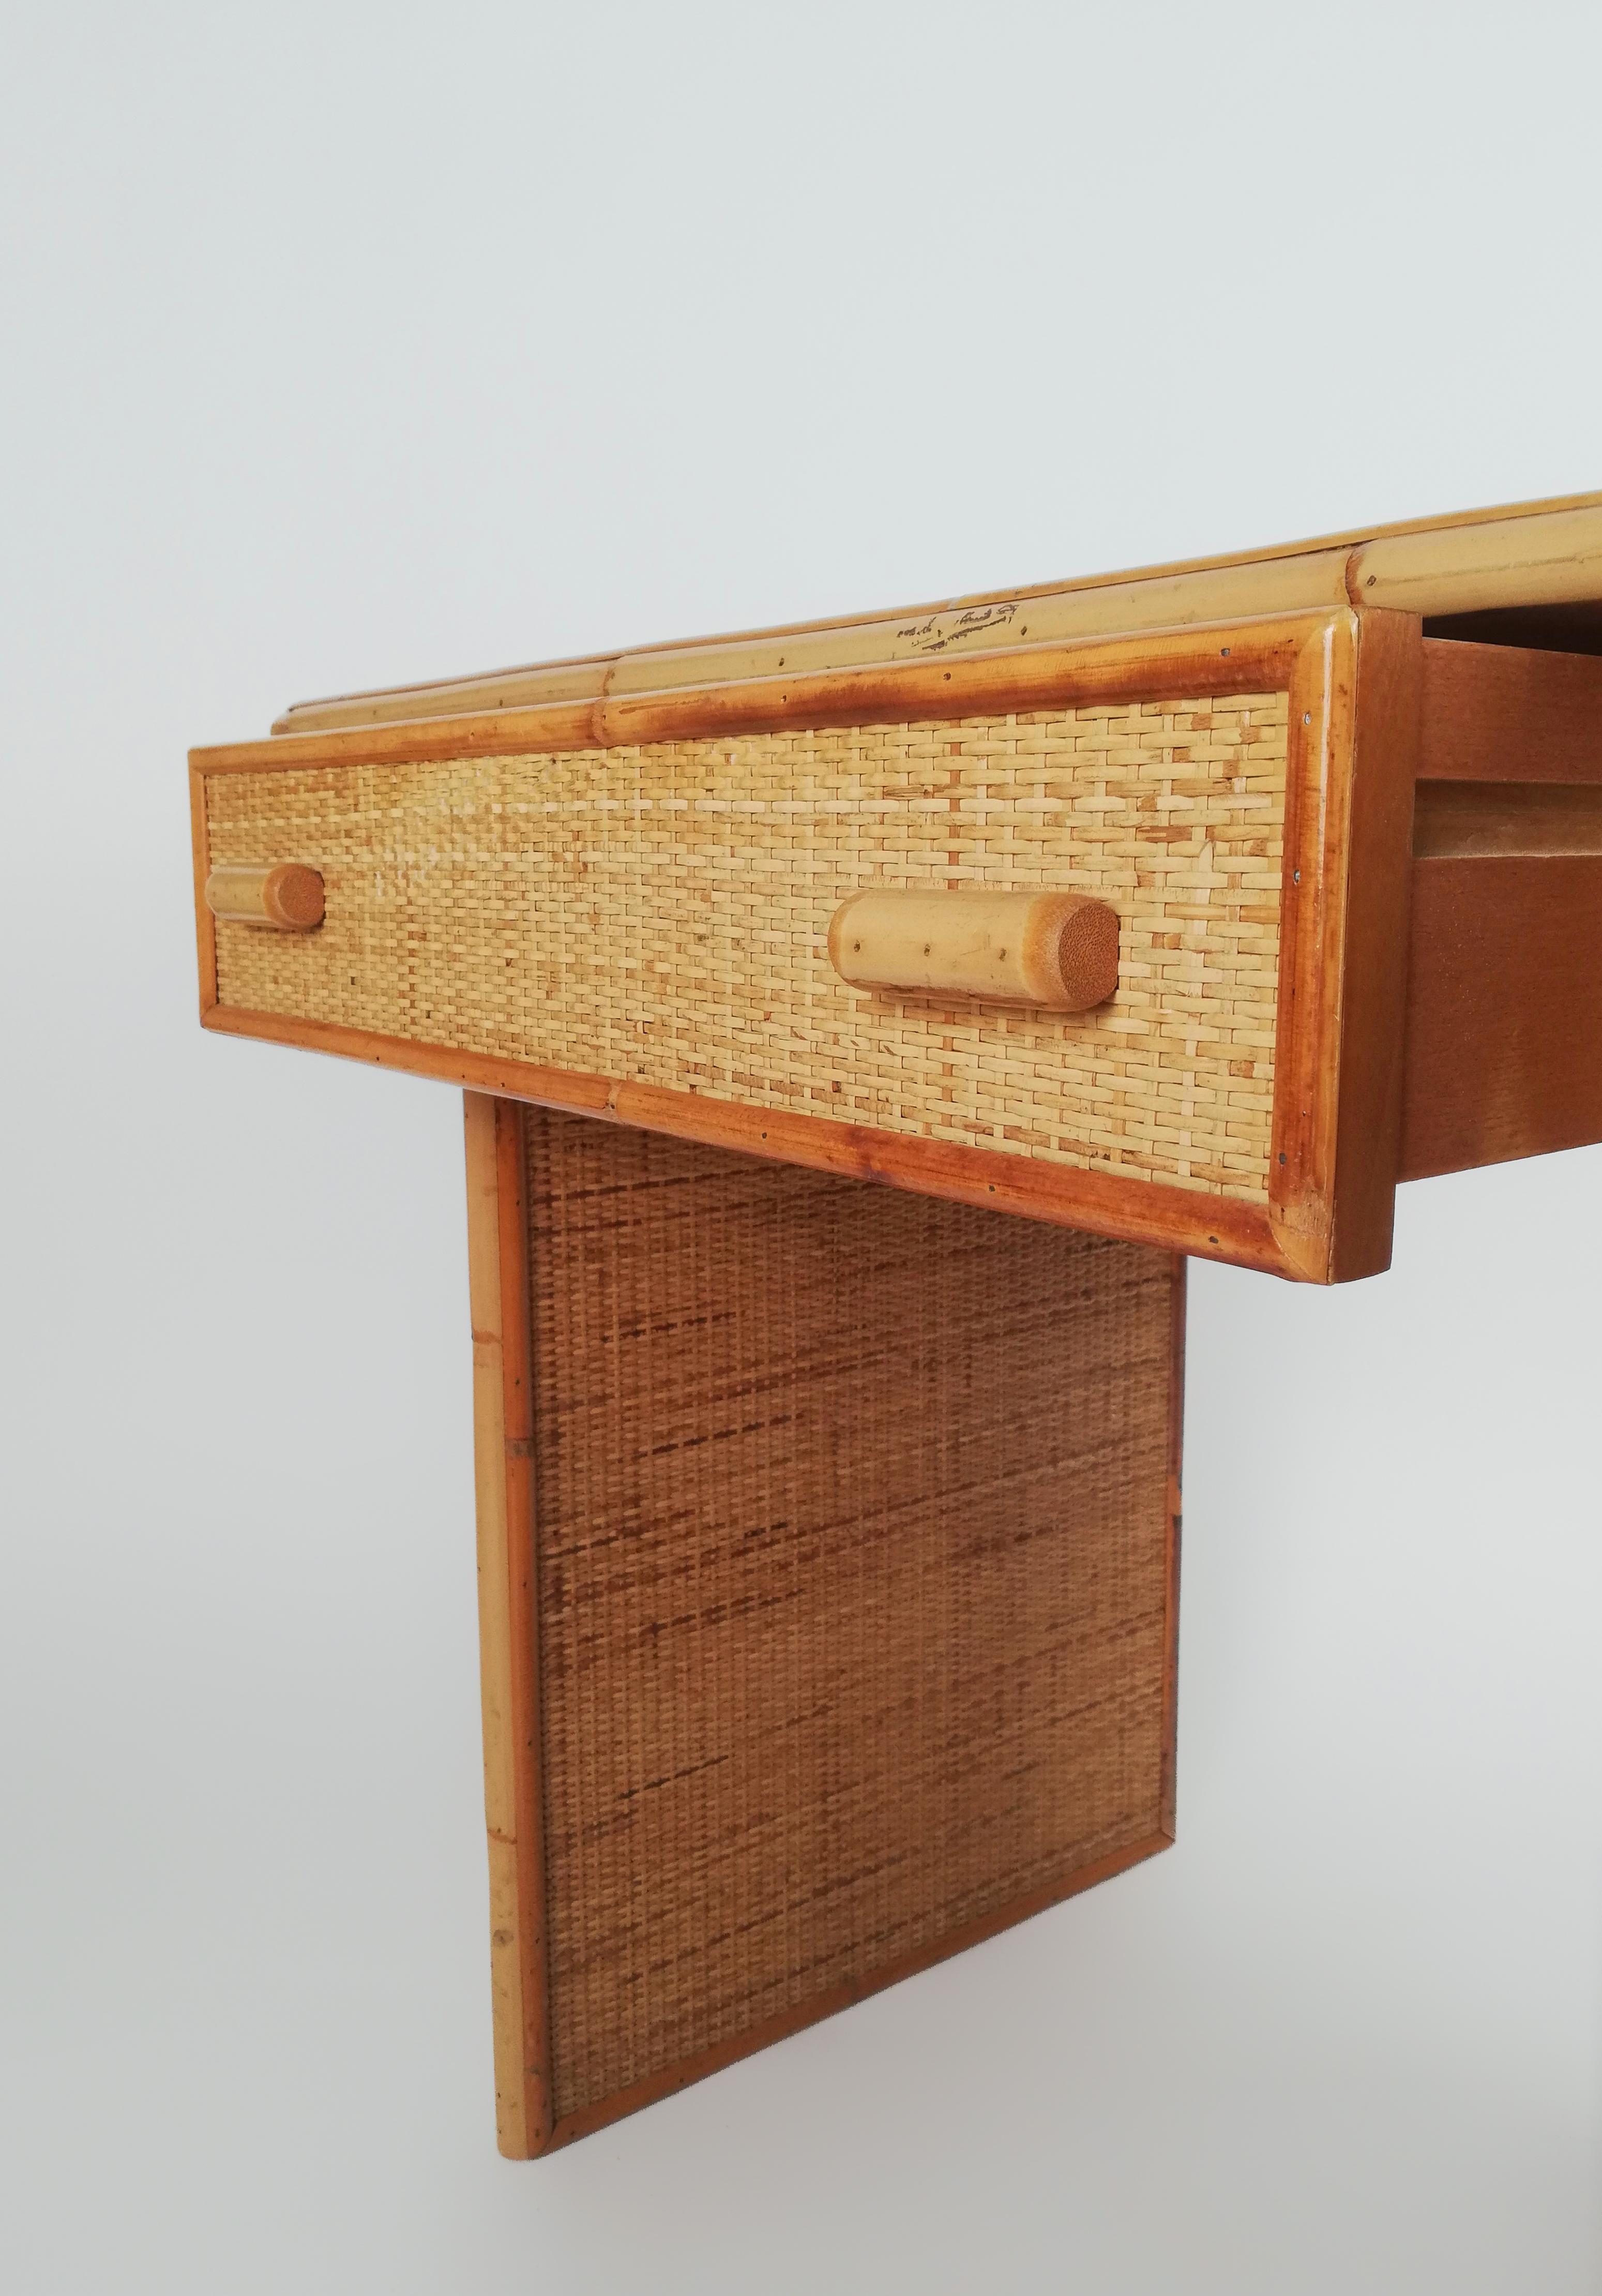 A Vintage Writing desk with drawers made in Italy between the 1960s and the 1970s.
This writing desk has a solid structure in ash wood and plywood covered with a thick texture of woven rattan and bamboo and canes inserts.
Equipped with a column of